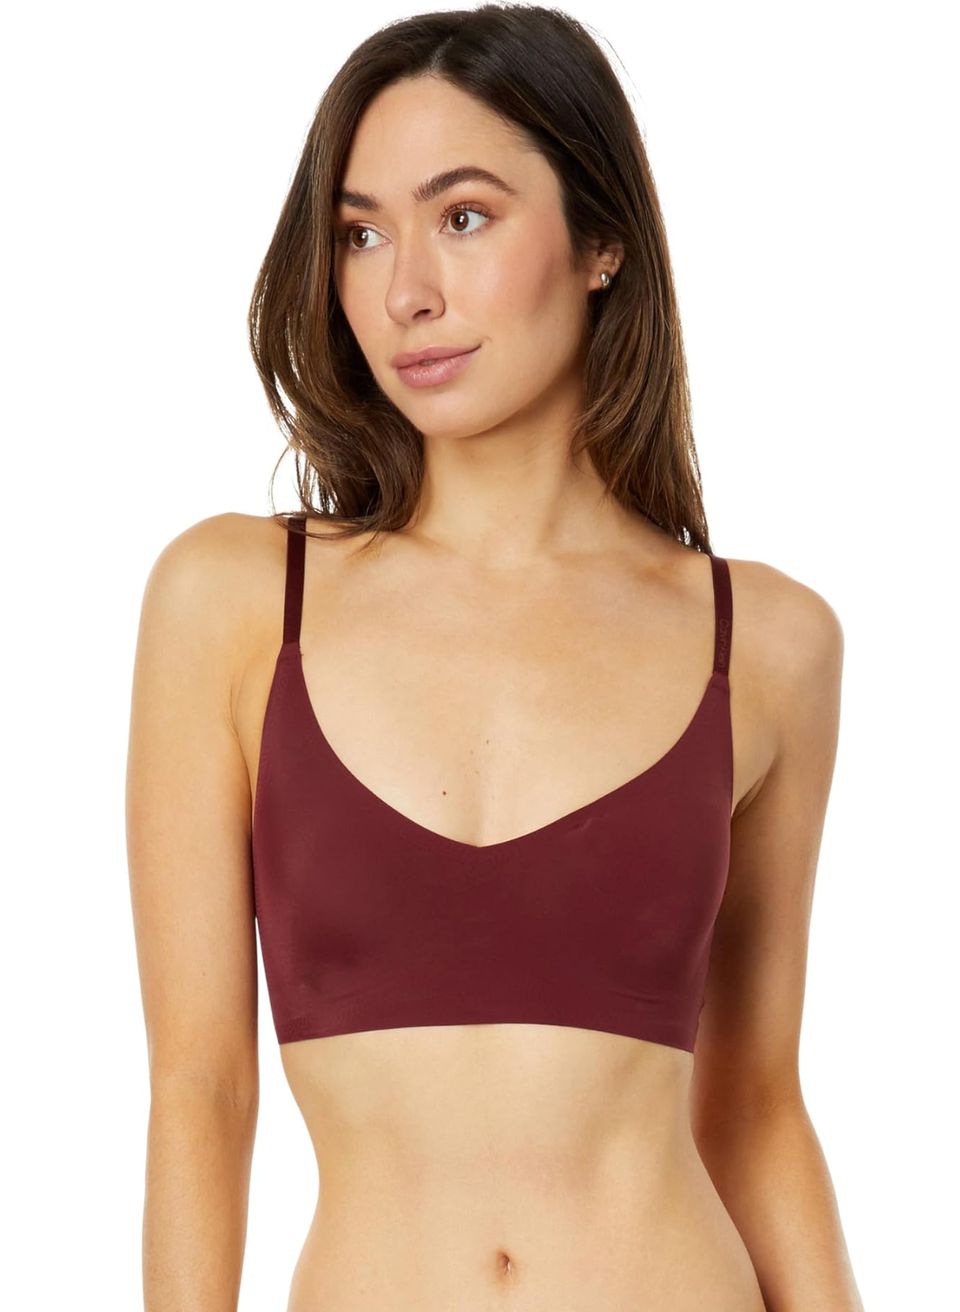 9 Bralettes From Target That Reviewers Recommend for Style and Support -  Yahoo Sports